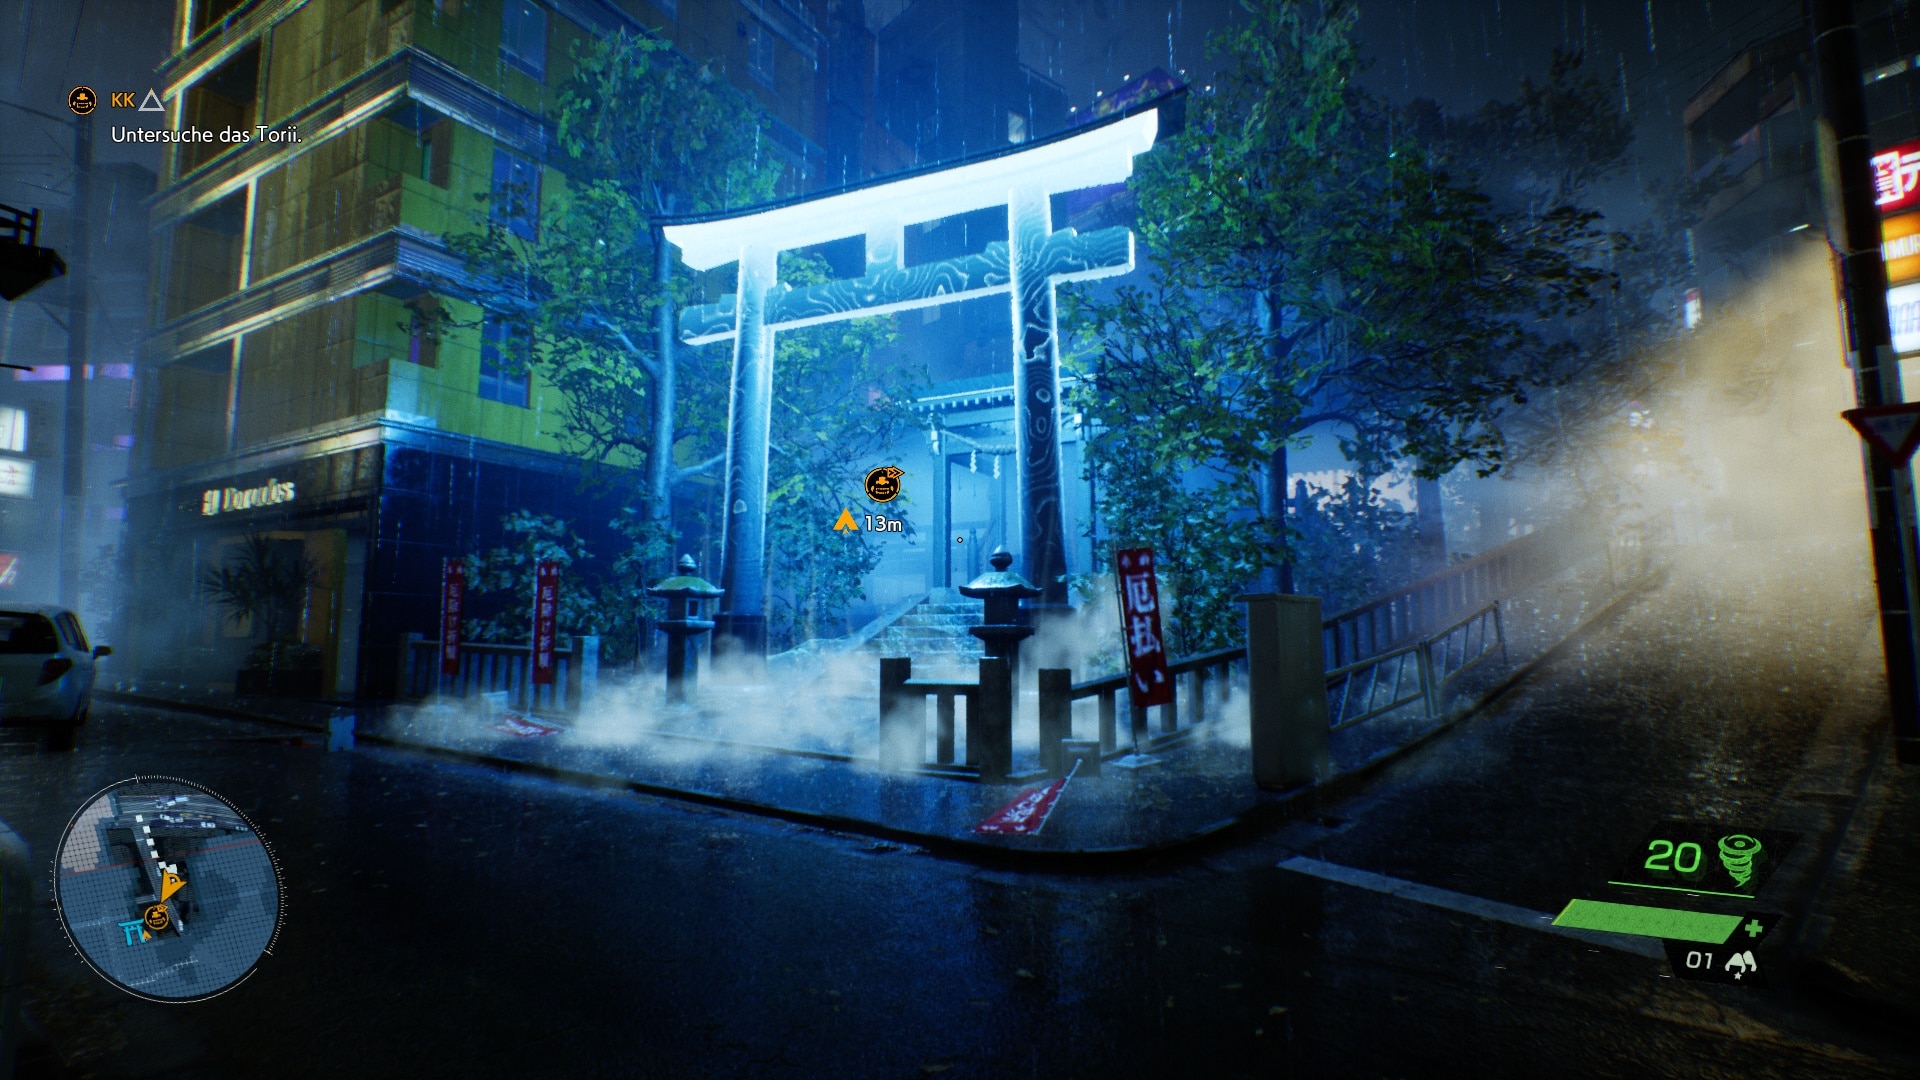 Torii stand at the entrance to Shinto shrines in Japan. In the game, we have to clean cursed torii to rid the surrounding streets of the deadly fog.